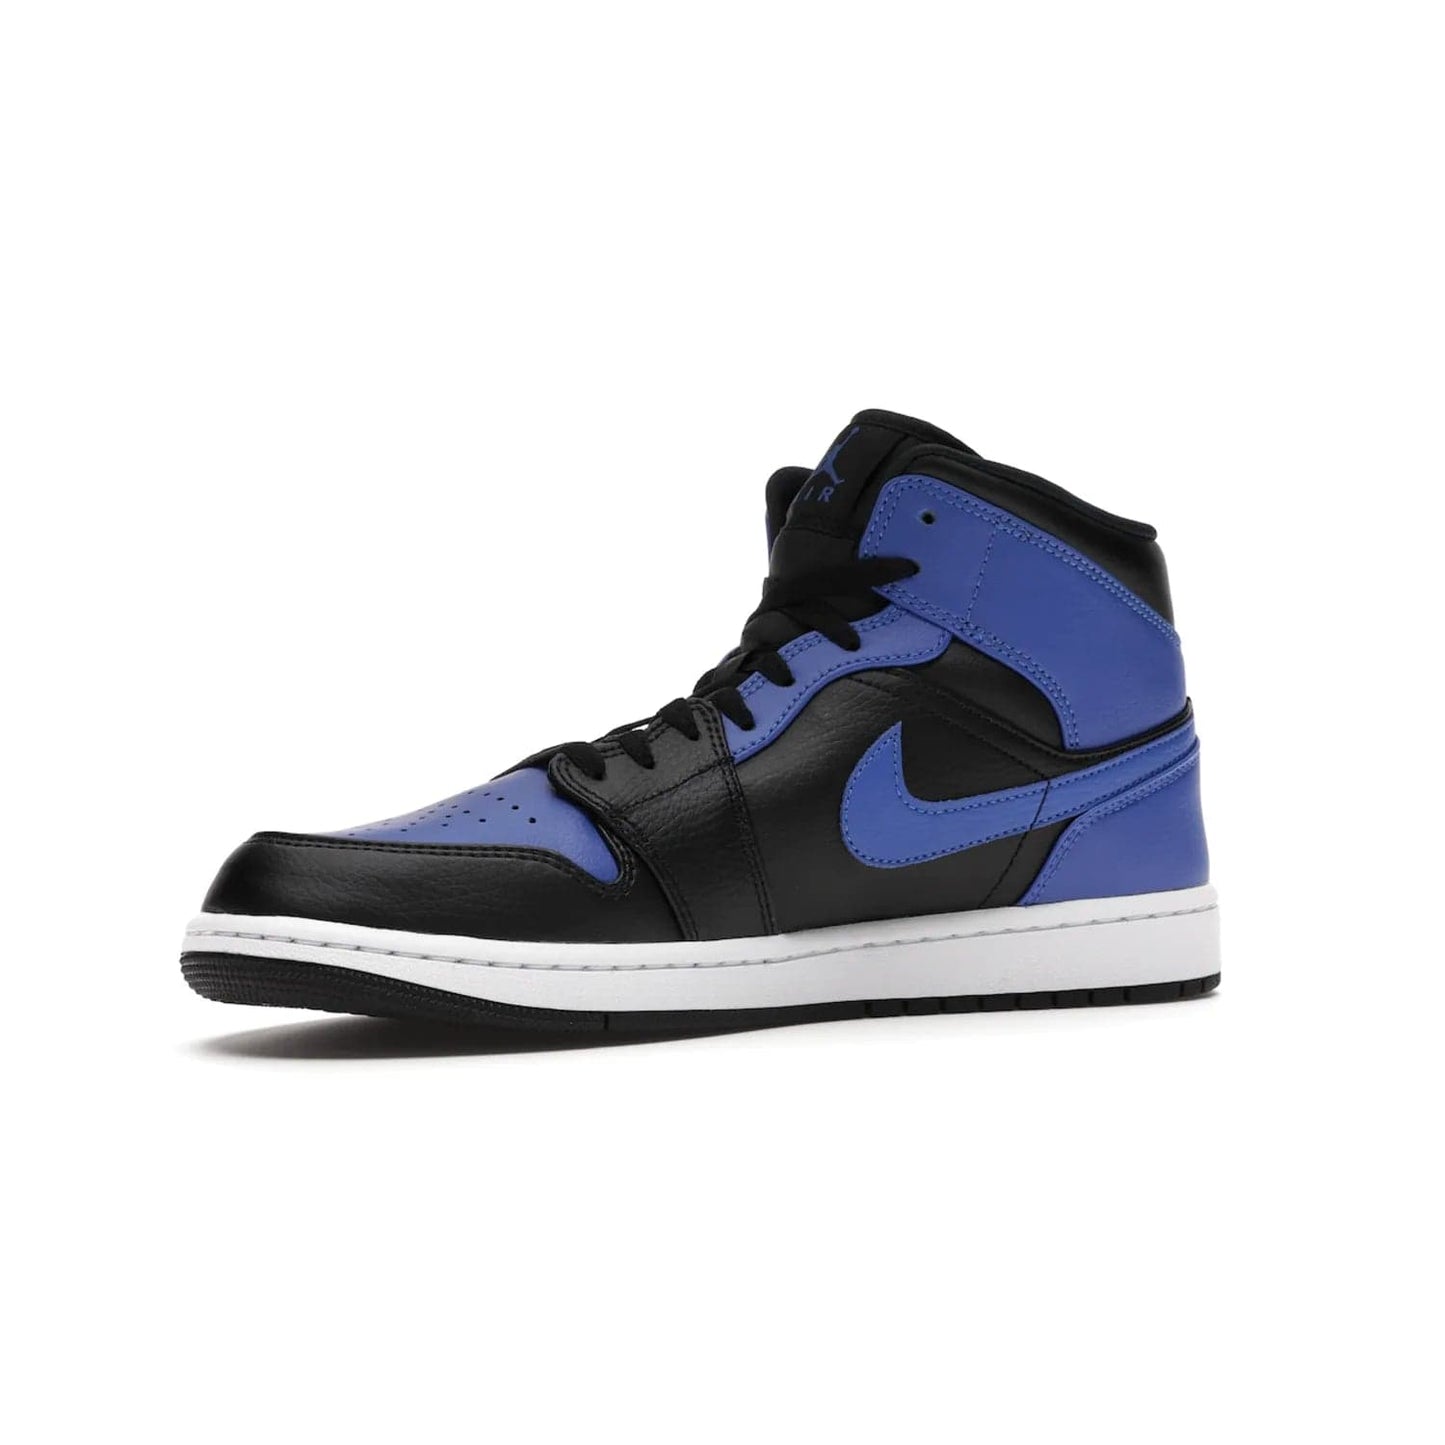 Jordan 1 Mid Hyper Royal Tumbled Leather - Image 16 - Only at www.BallersClubKickz.com - Iconic colorway of the Air Jordan 1 Mid Black Royal Tumbled Leather. Features a black tumbled leather upper, royal blue leather overlays, white midsole & black rubber outsole. Released December 2020. Adds premium style to any collection.